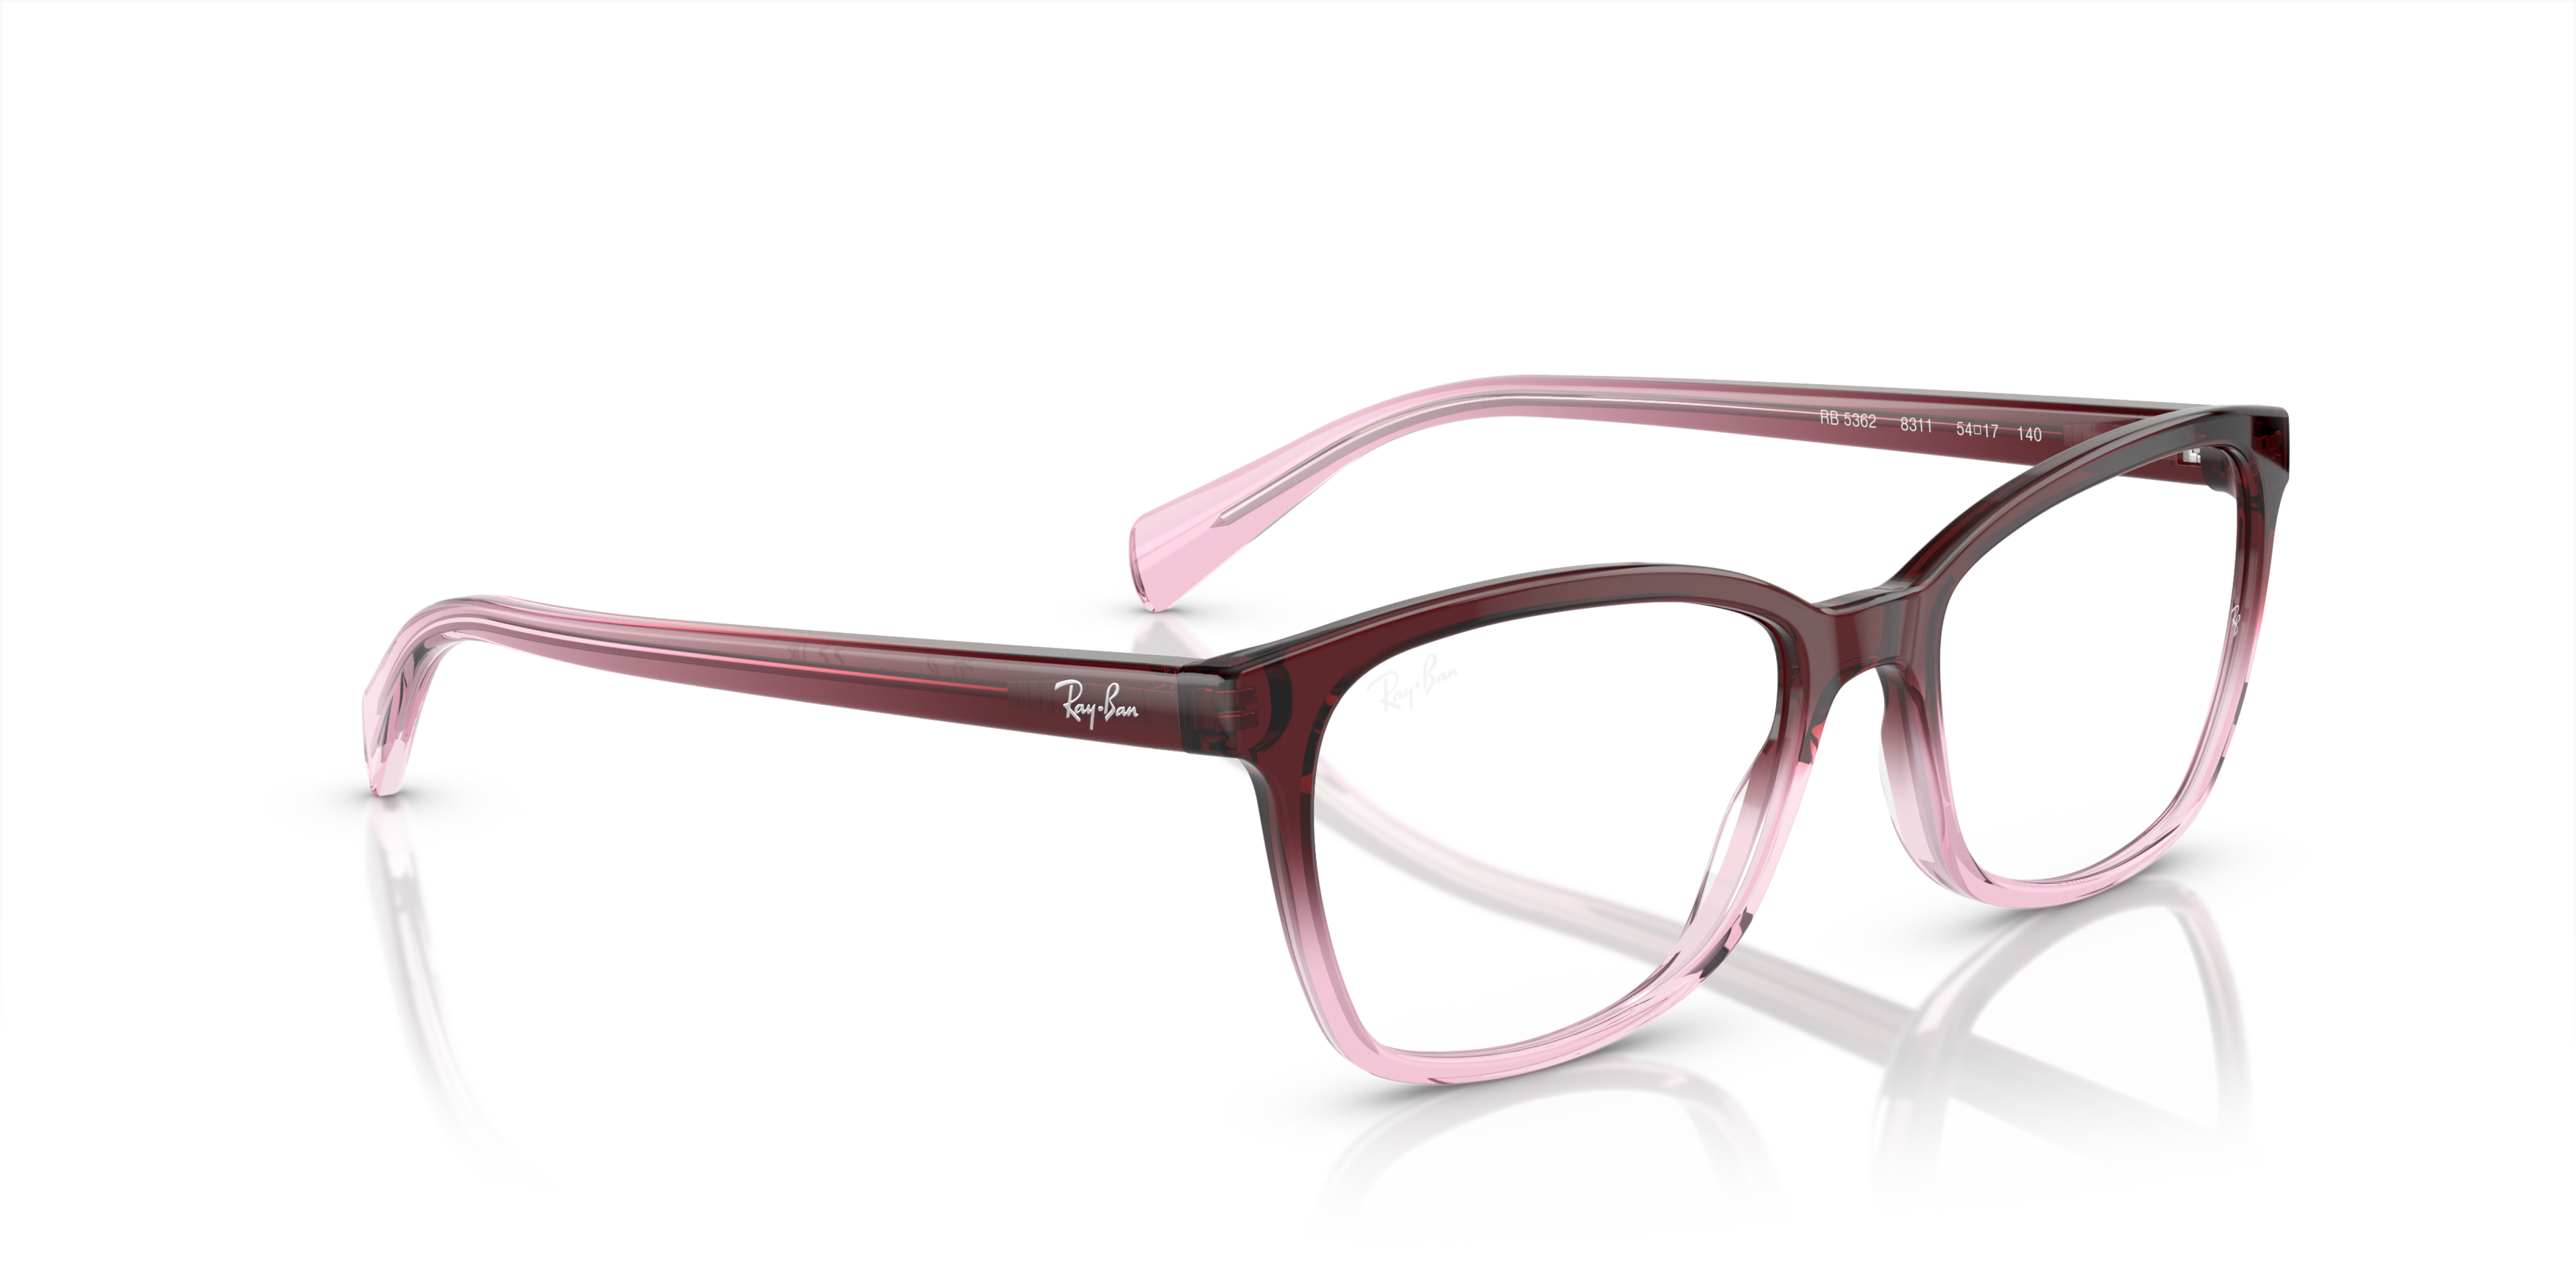 Angle_Right01 Ray-Ban RX 5362 Glasses Transparent / Purple